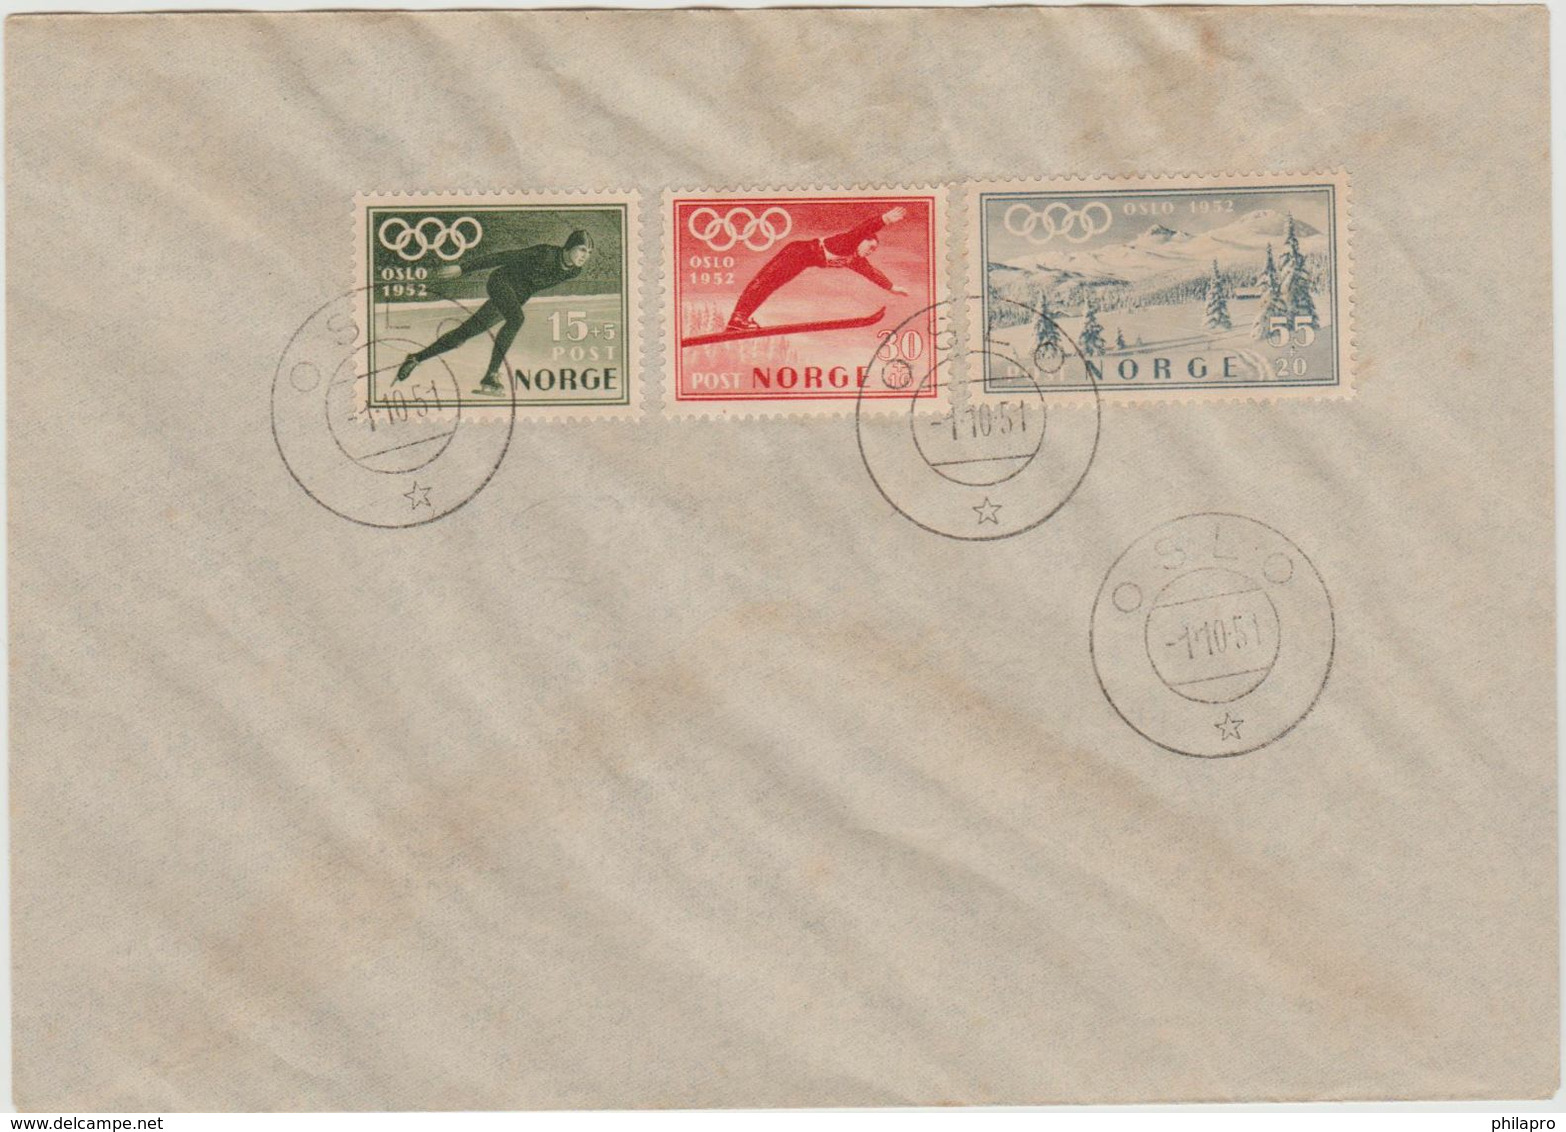 NORVEGE / NORWAY    FDC  OLYMPIC 1952  Réf  Q 556 - Invierno 1952: Oslo